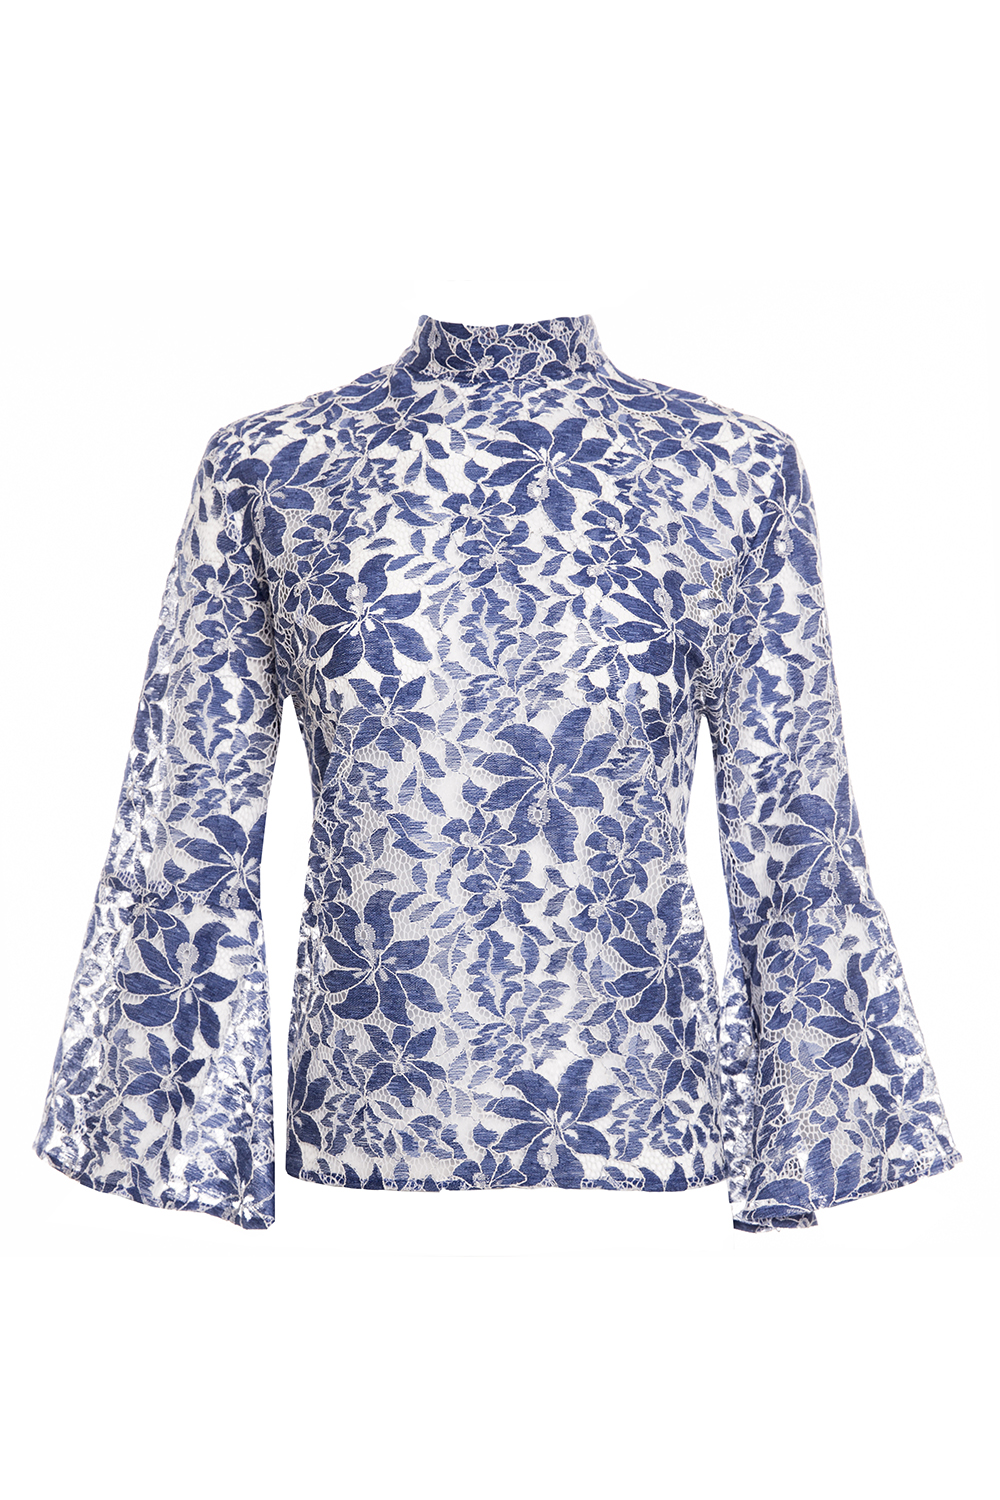 Blouse, $289, by Repertoire.